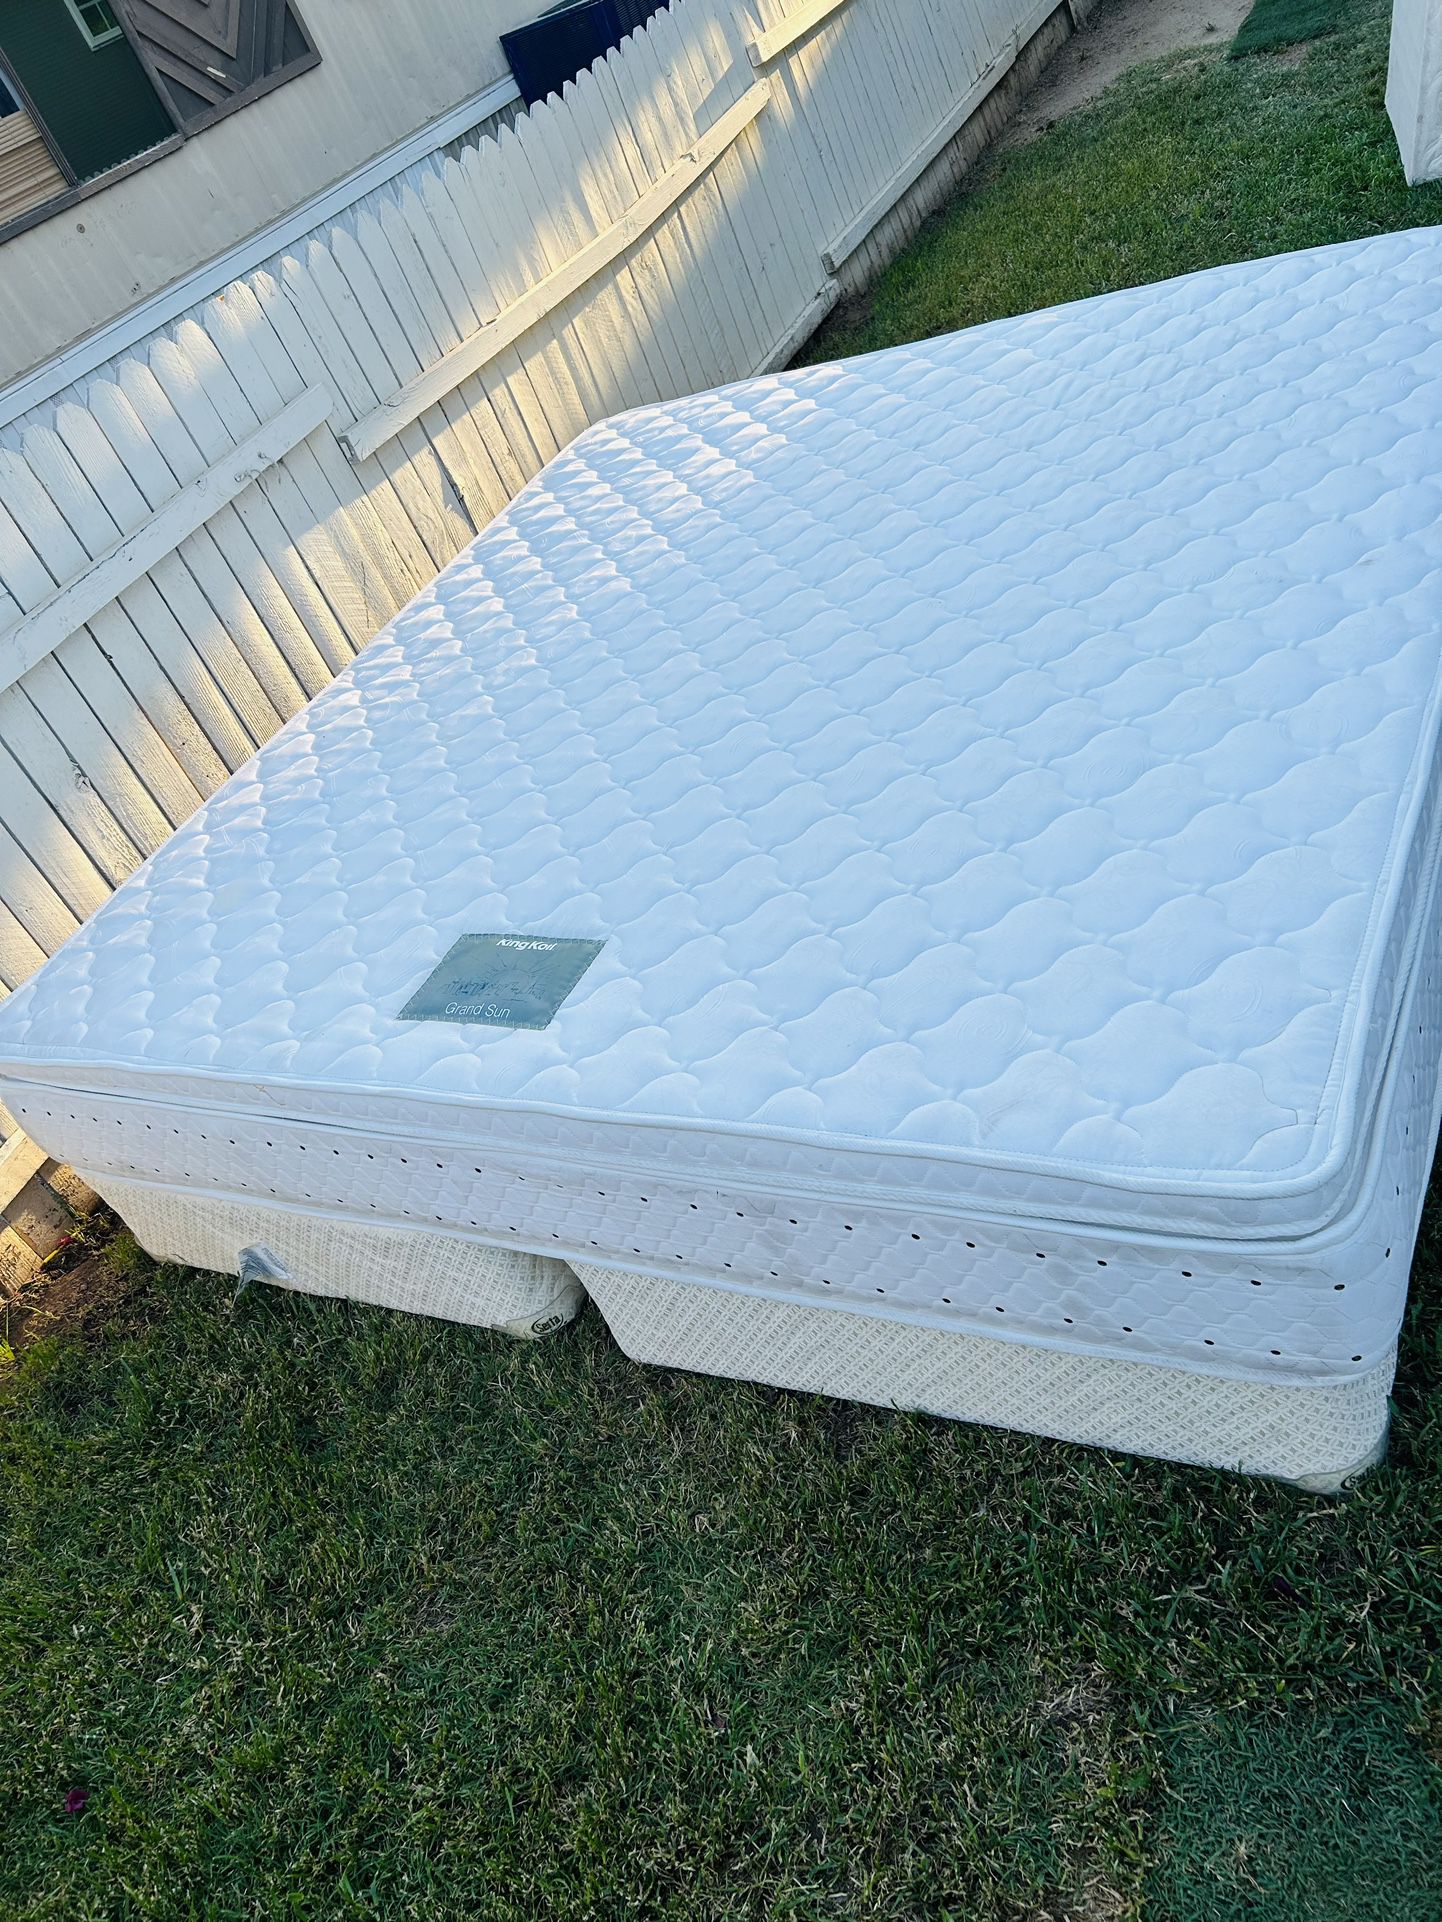 King Bed Mattress And Box Spring Good Condition 